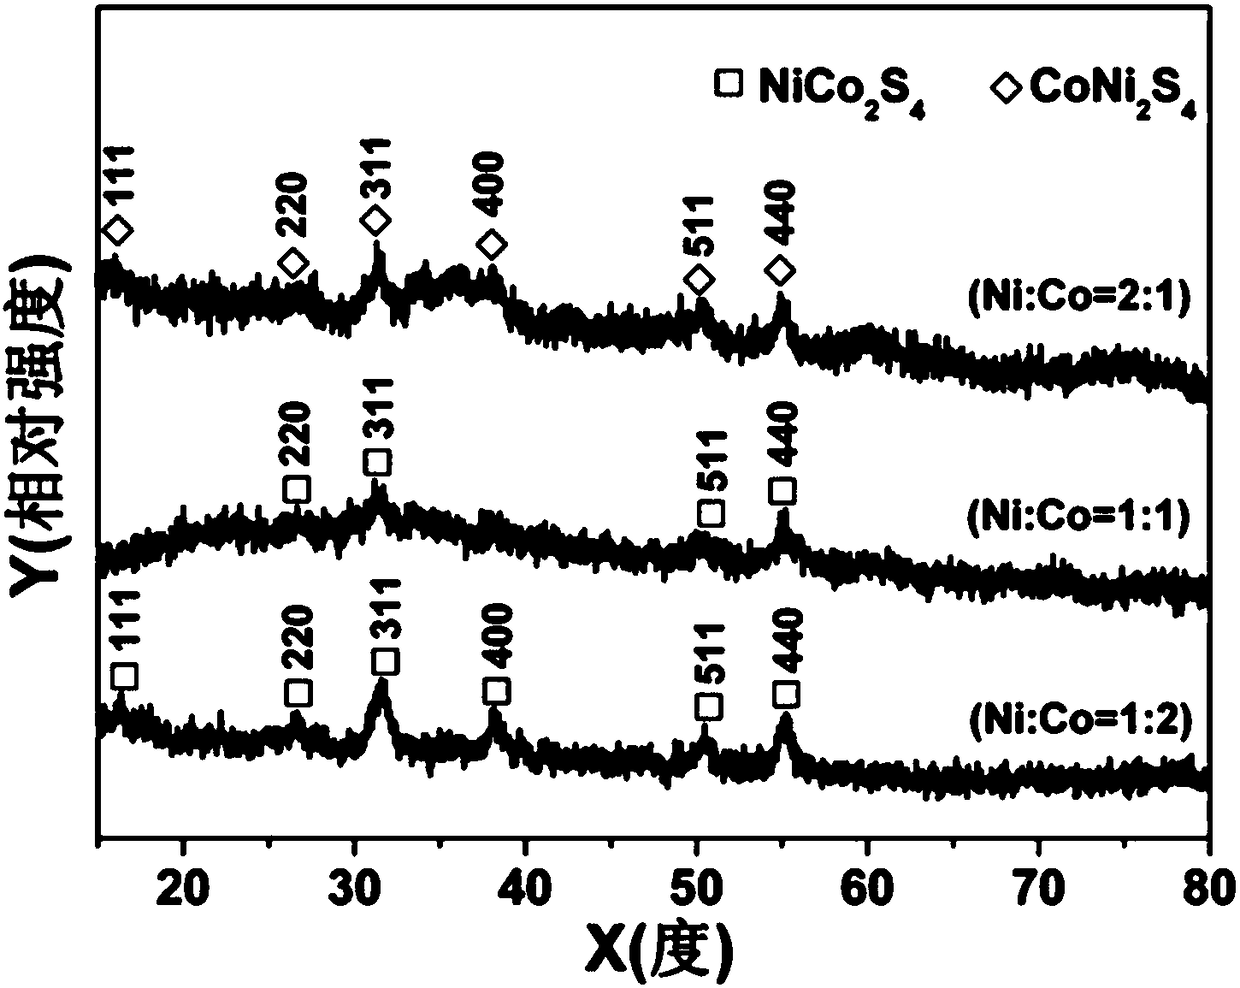 A simple preparation method for cobalt-nickel sulfide nanosheets used as electrode materials for supercapacitors